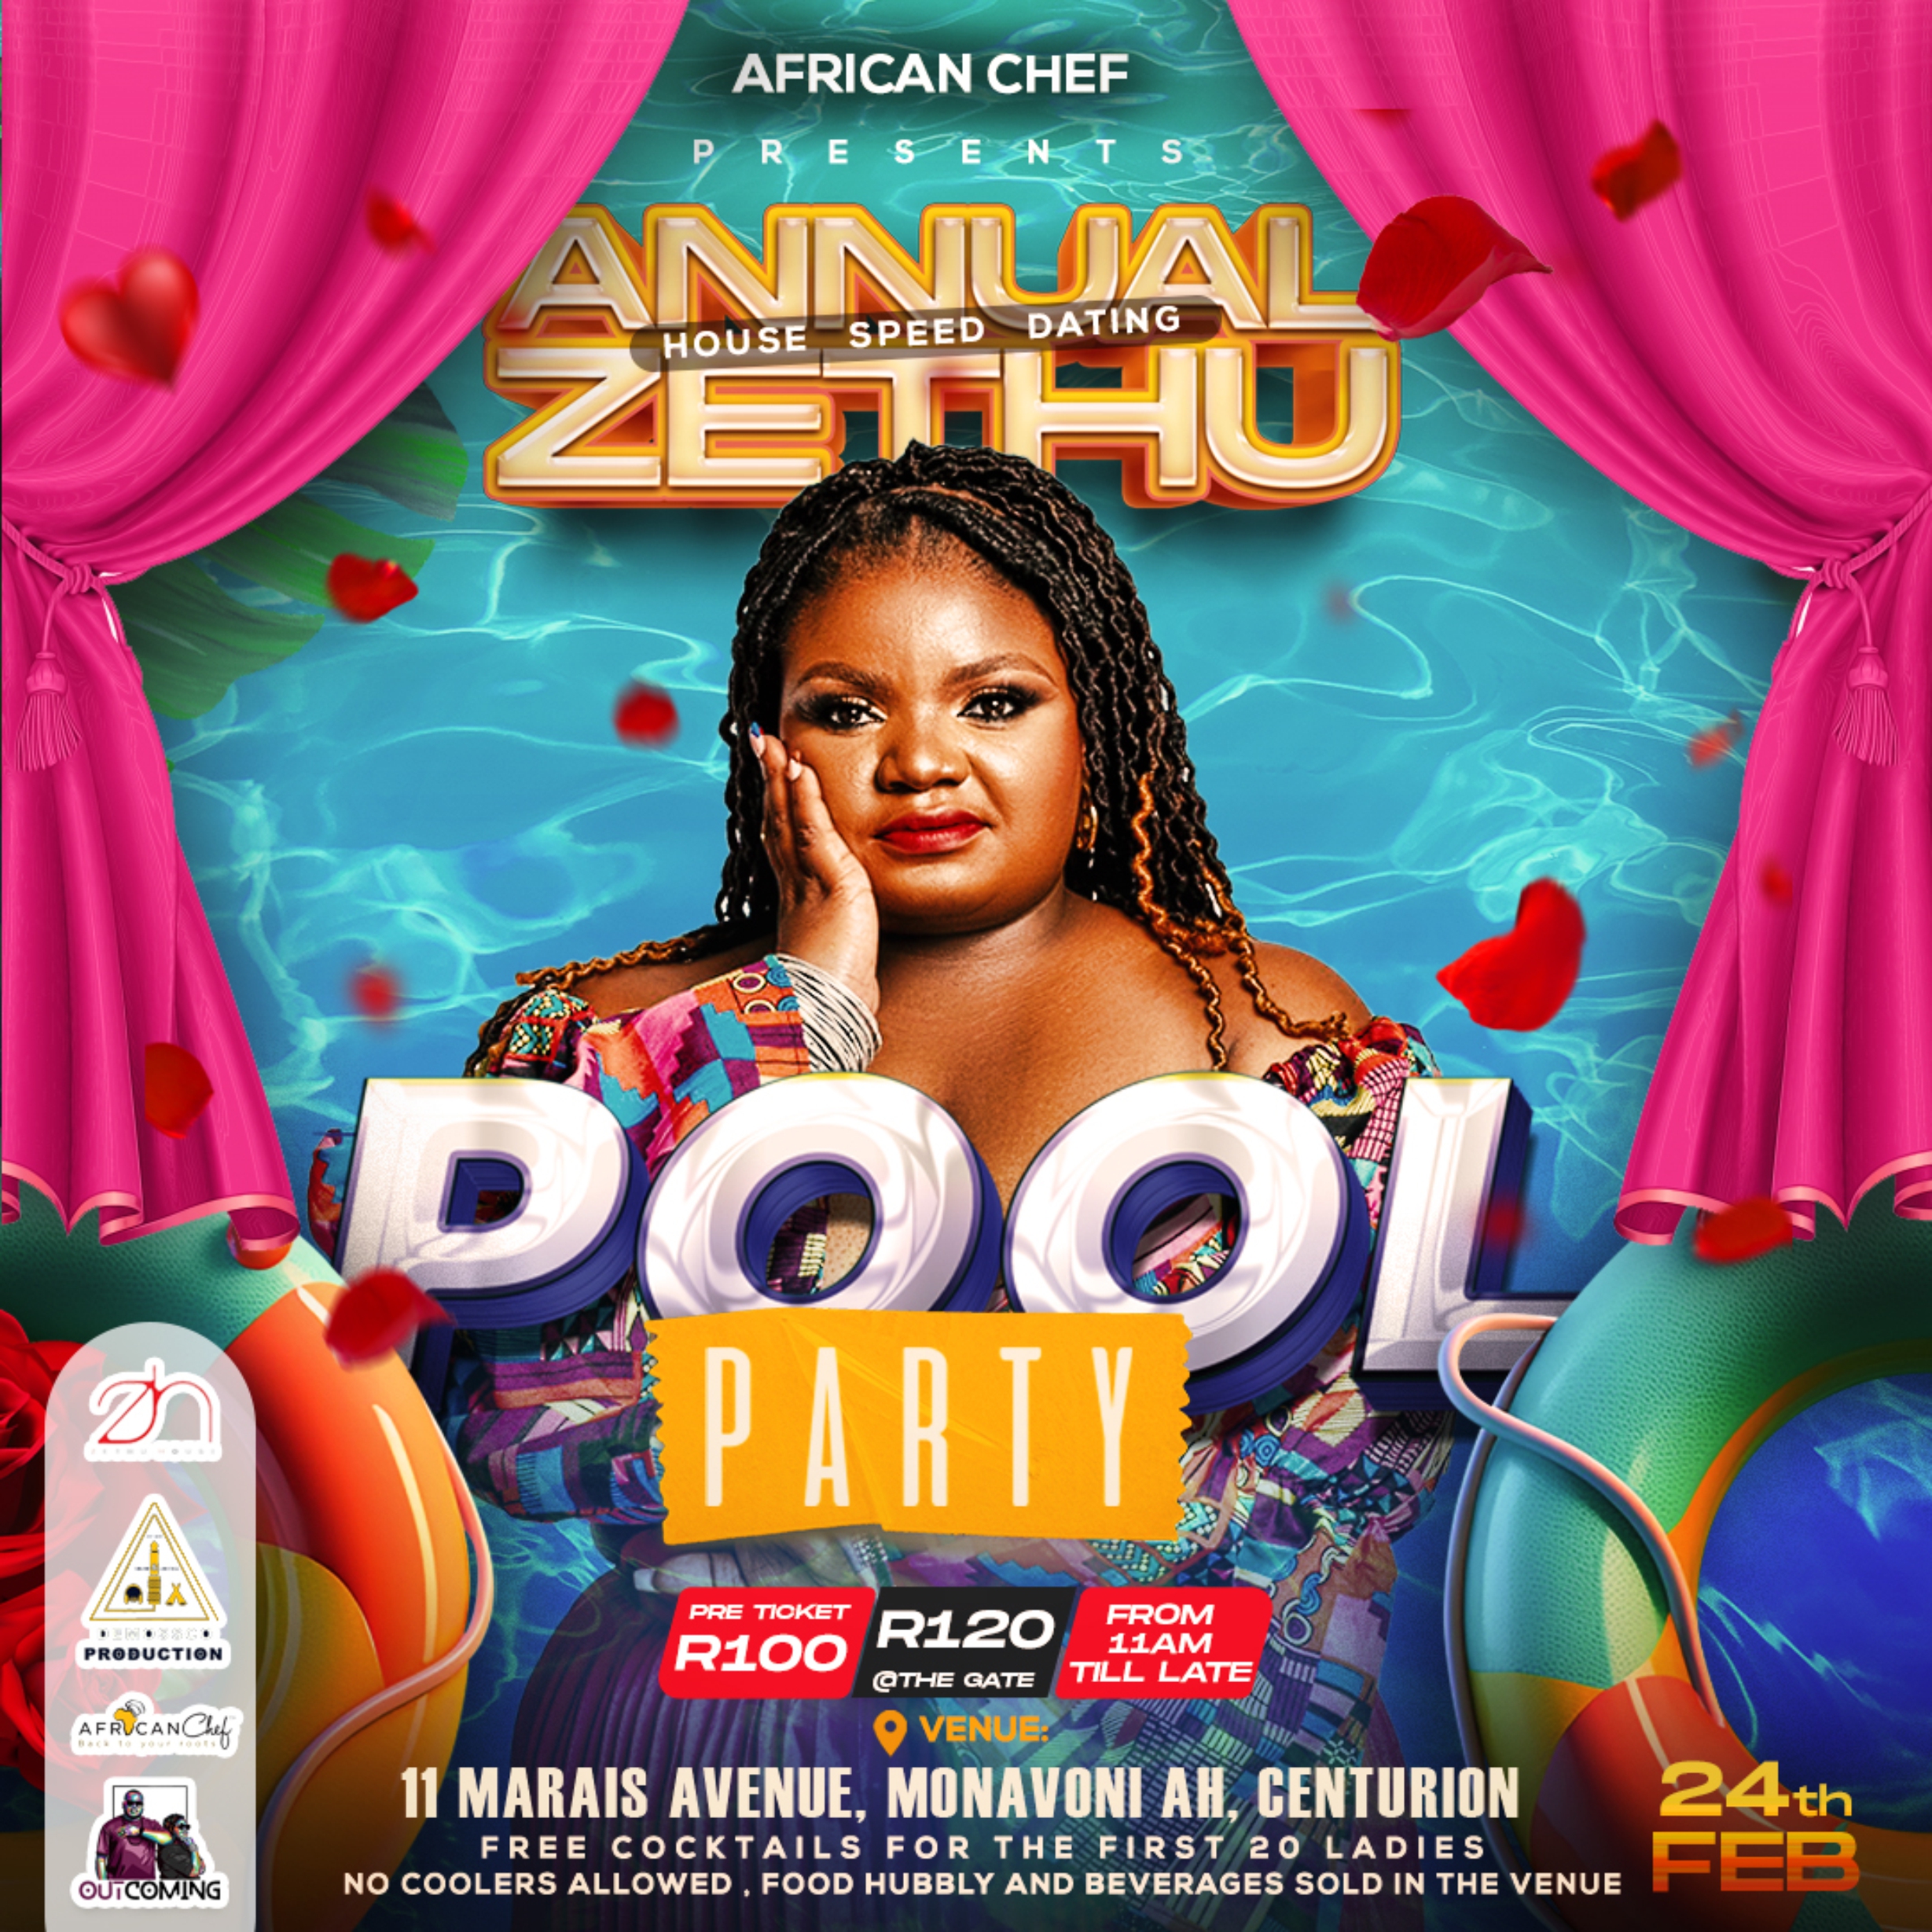 Annual Zethu House Speed dating Pool Party (Valentines Edition )